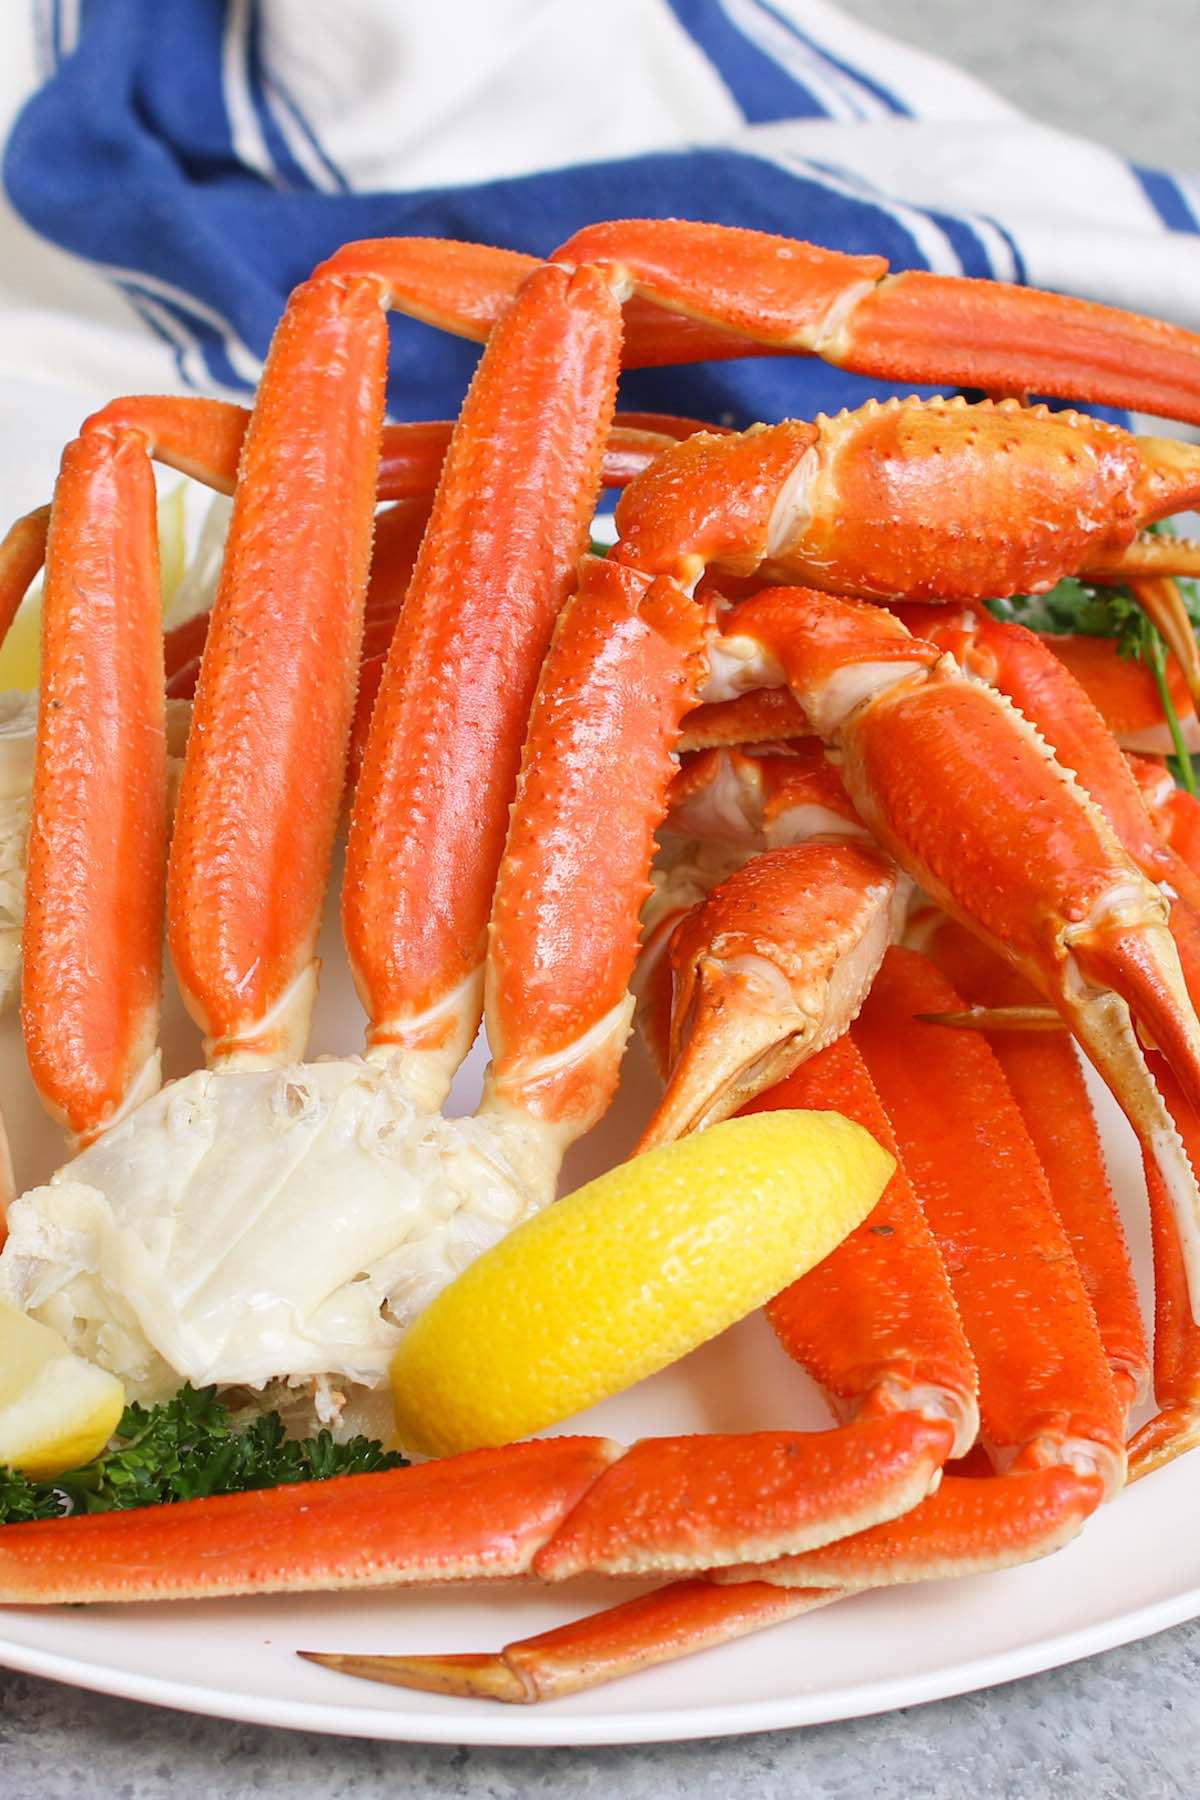 Treat your guests to these succulent Snow Crab Legs seasoned with Old Bay seasoning. They’re incredibly easy to make and ready to eat in just 10 minutes!